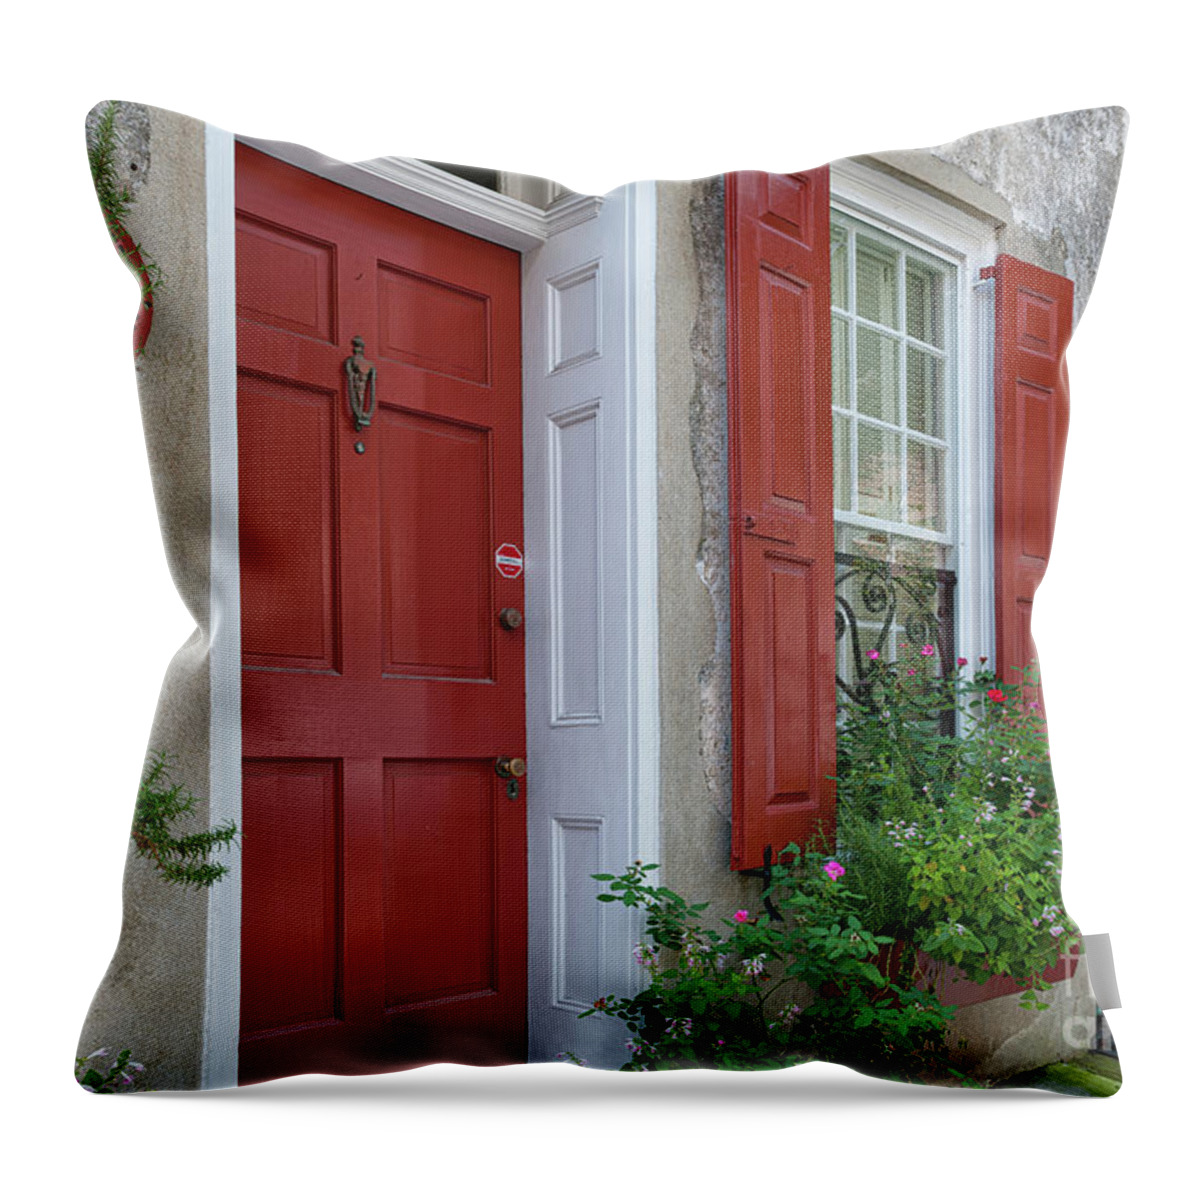 25 Queen Street Throw Pillow featuring the photograph 25 Queen Street by Dale Powell